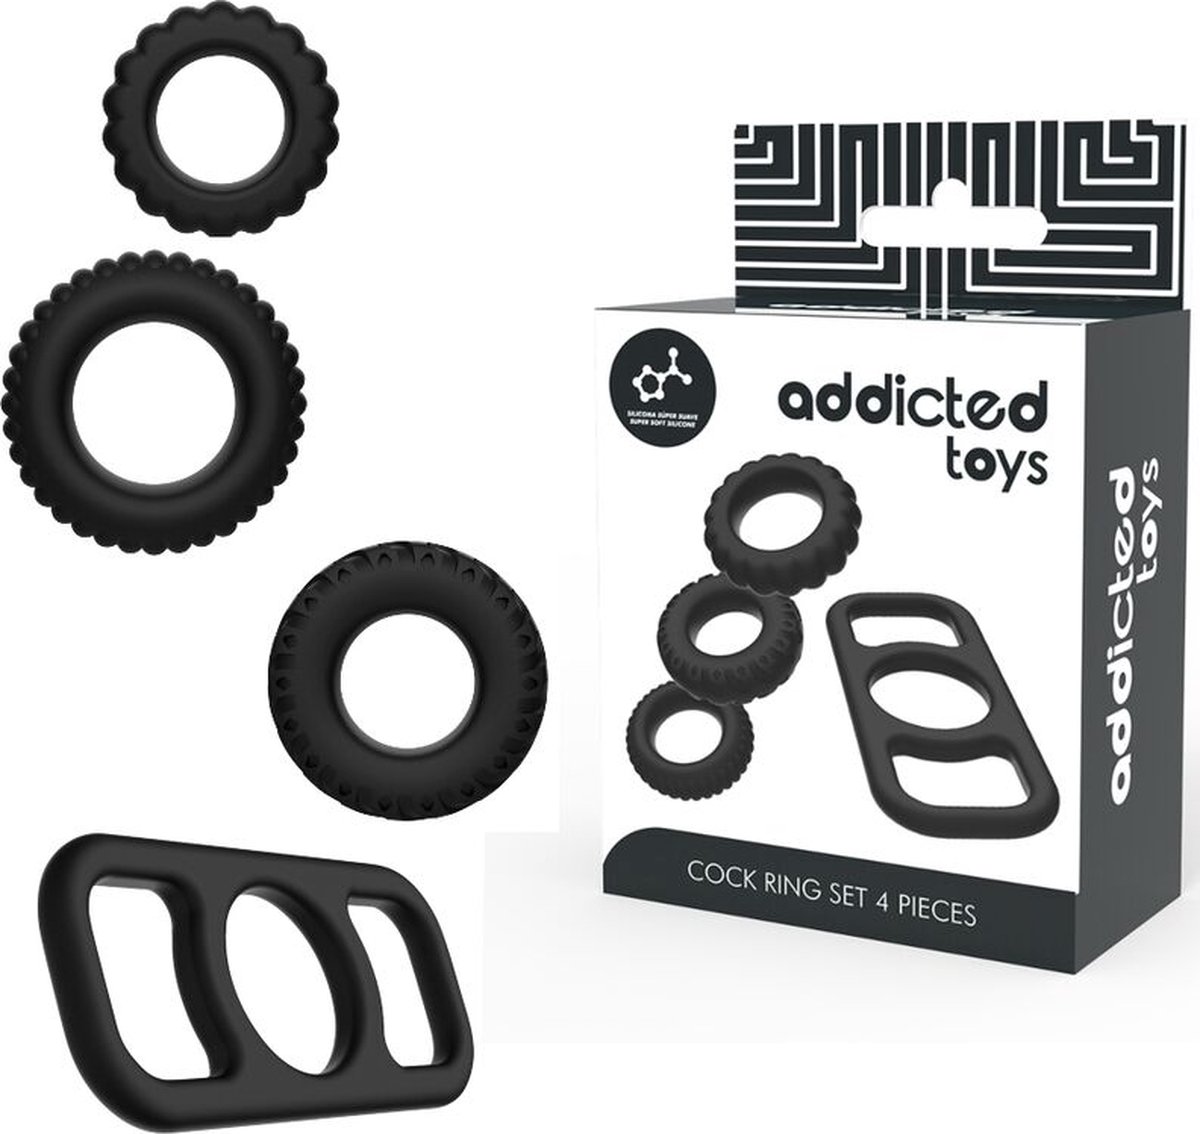 ADDICTED TOYS | Addicted Toys Cock Ring Set 4 Pieces | Sex Toy for Couples | Cockring | Sex Toy for Man